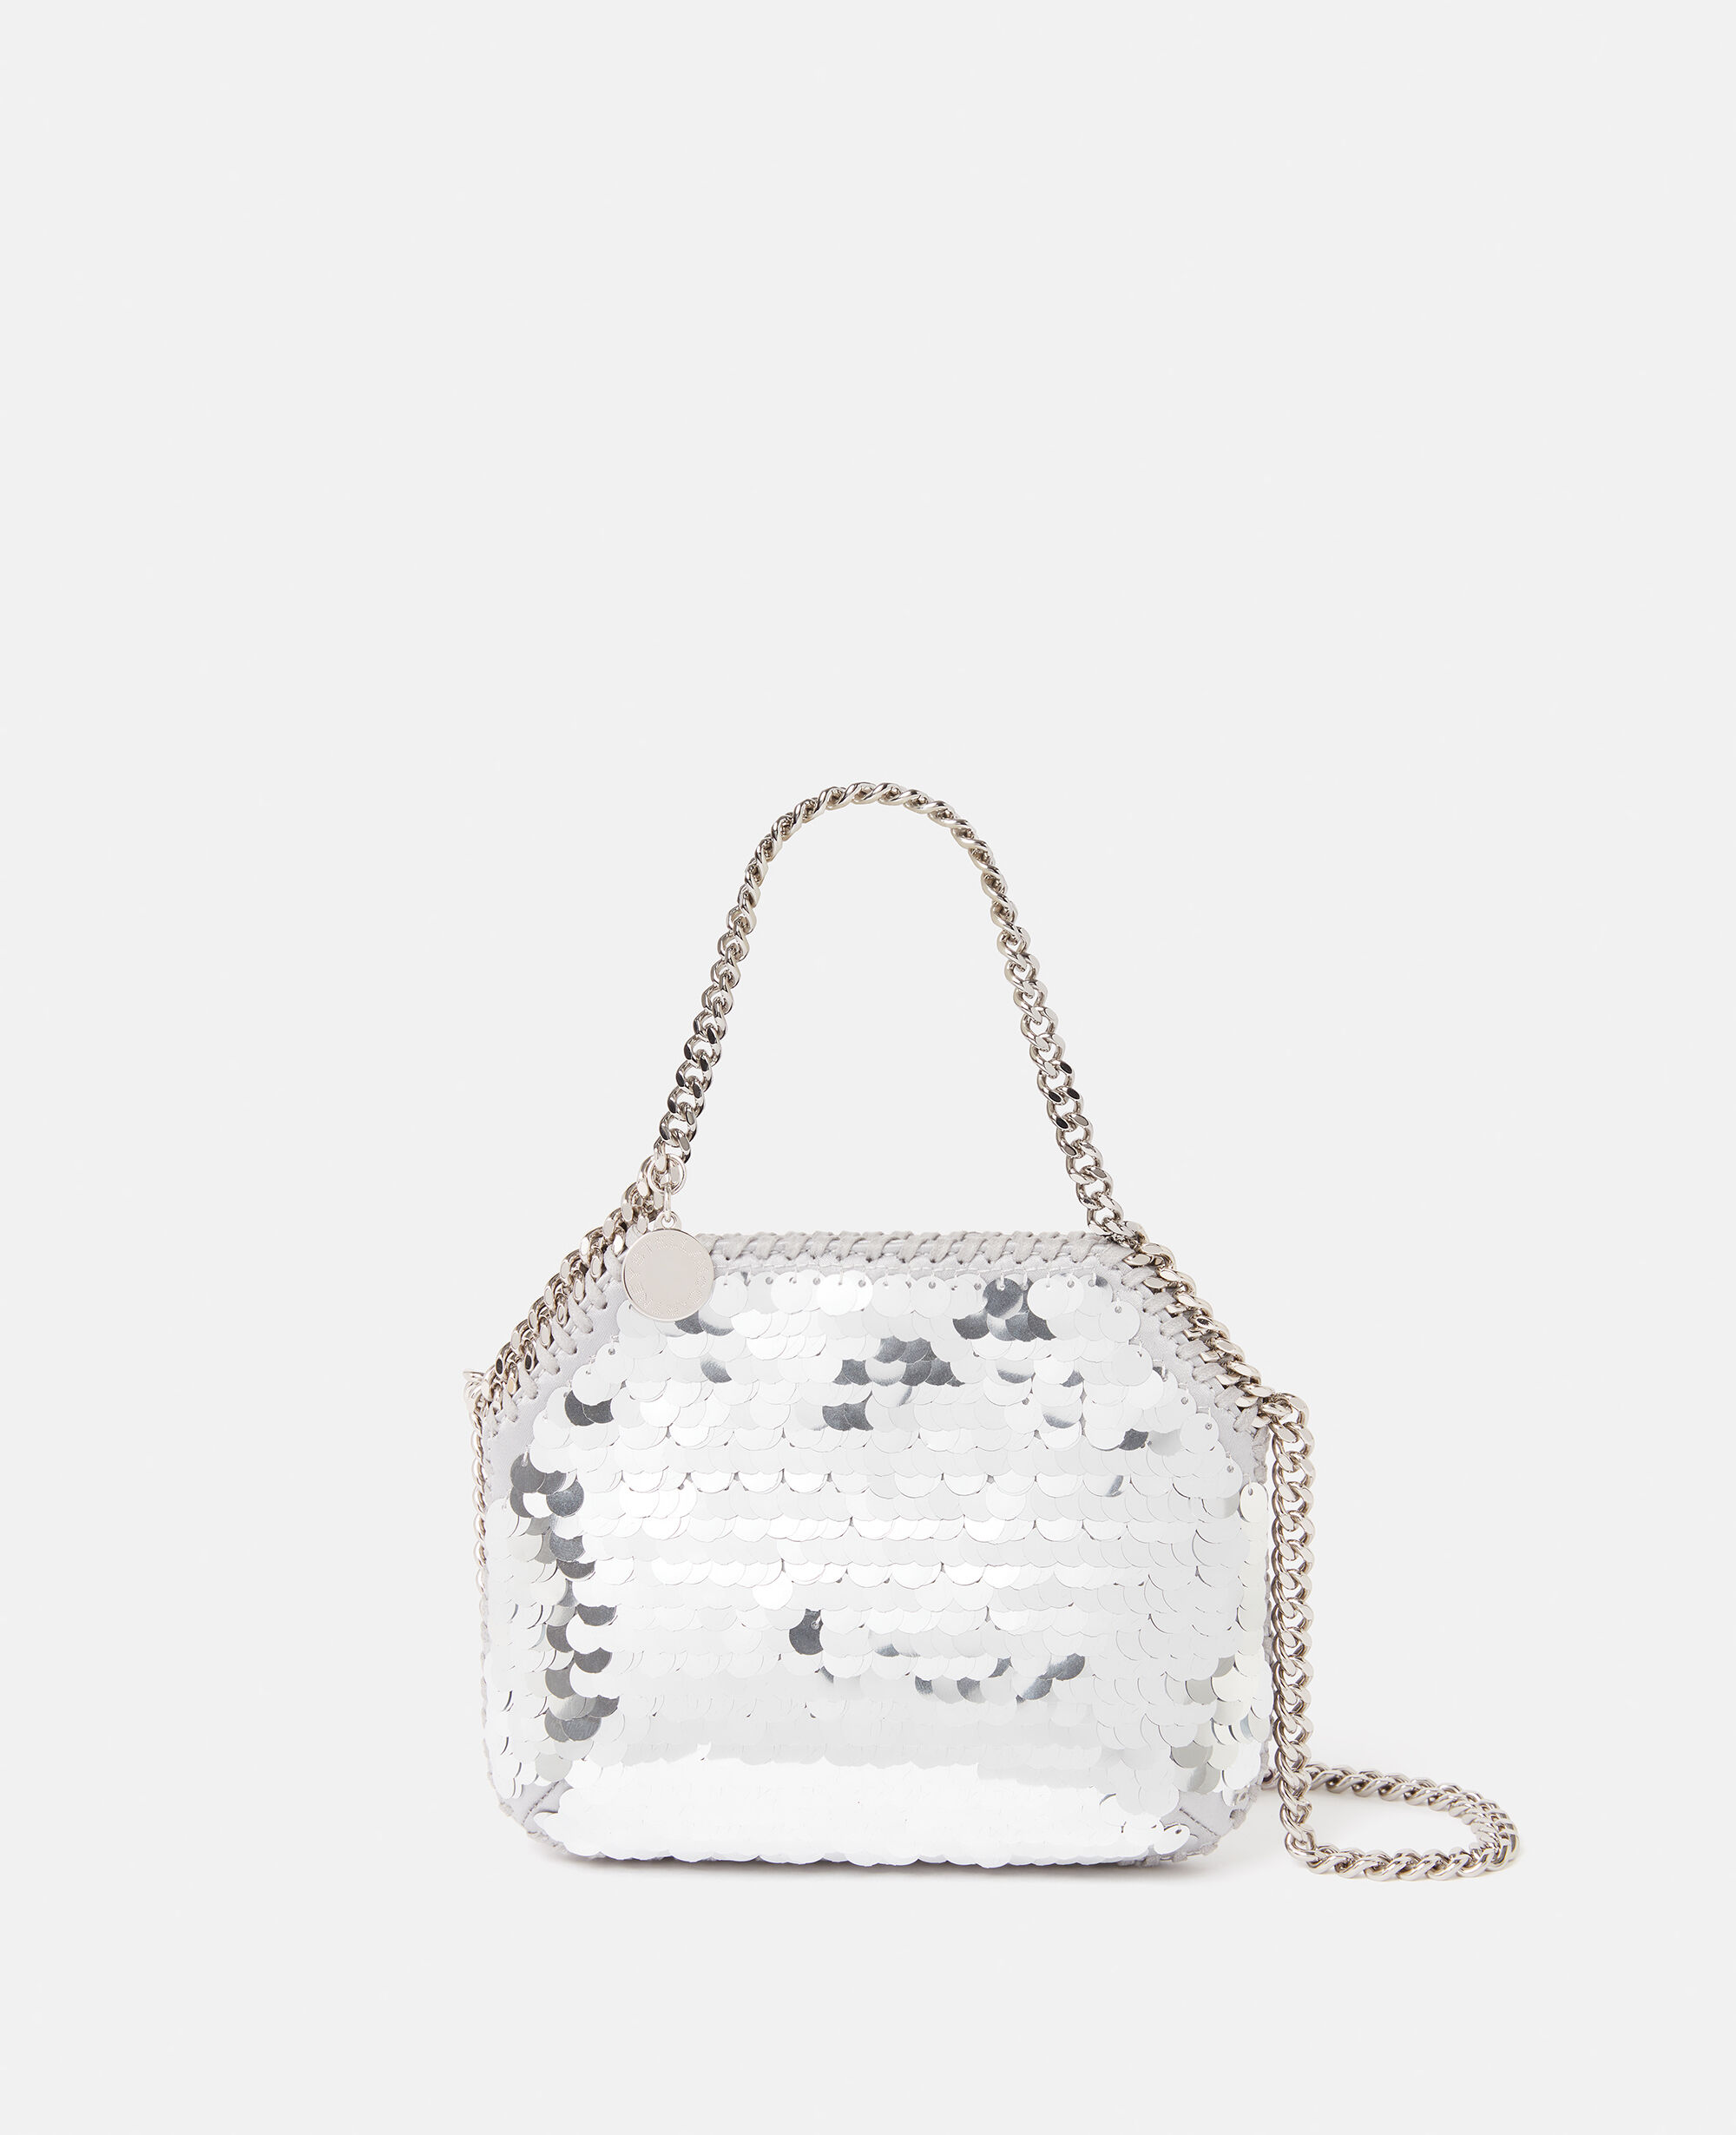 thoughts on the sequin trend? : r/handbags